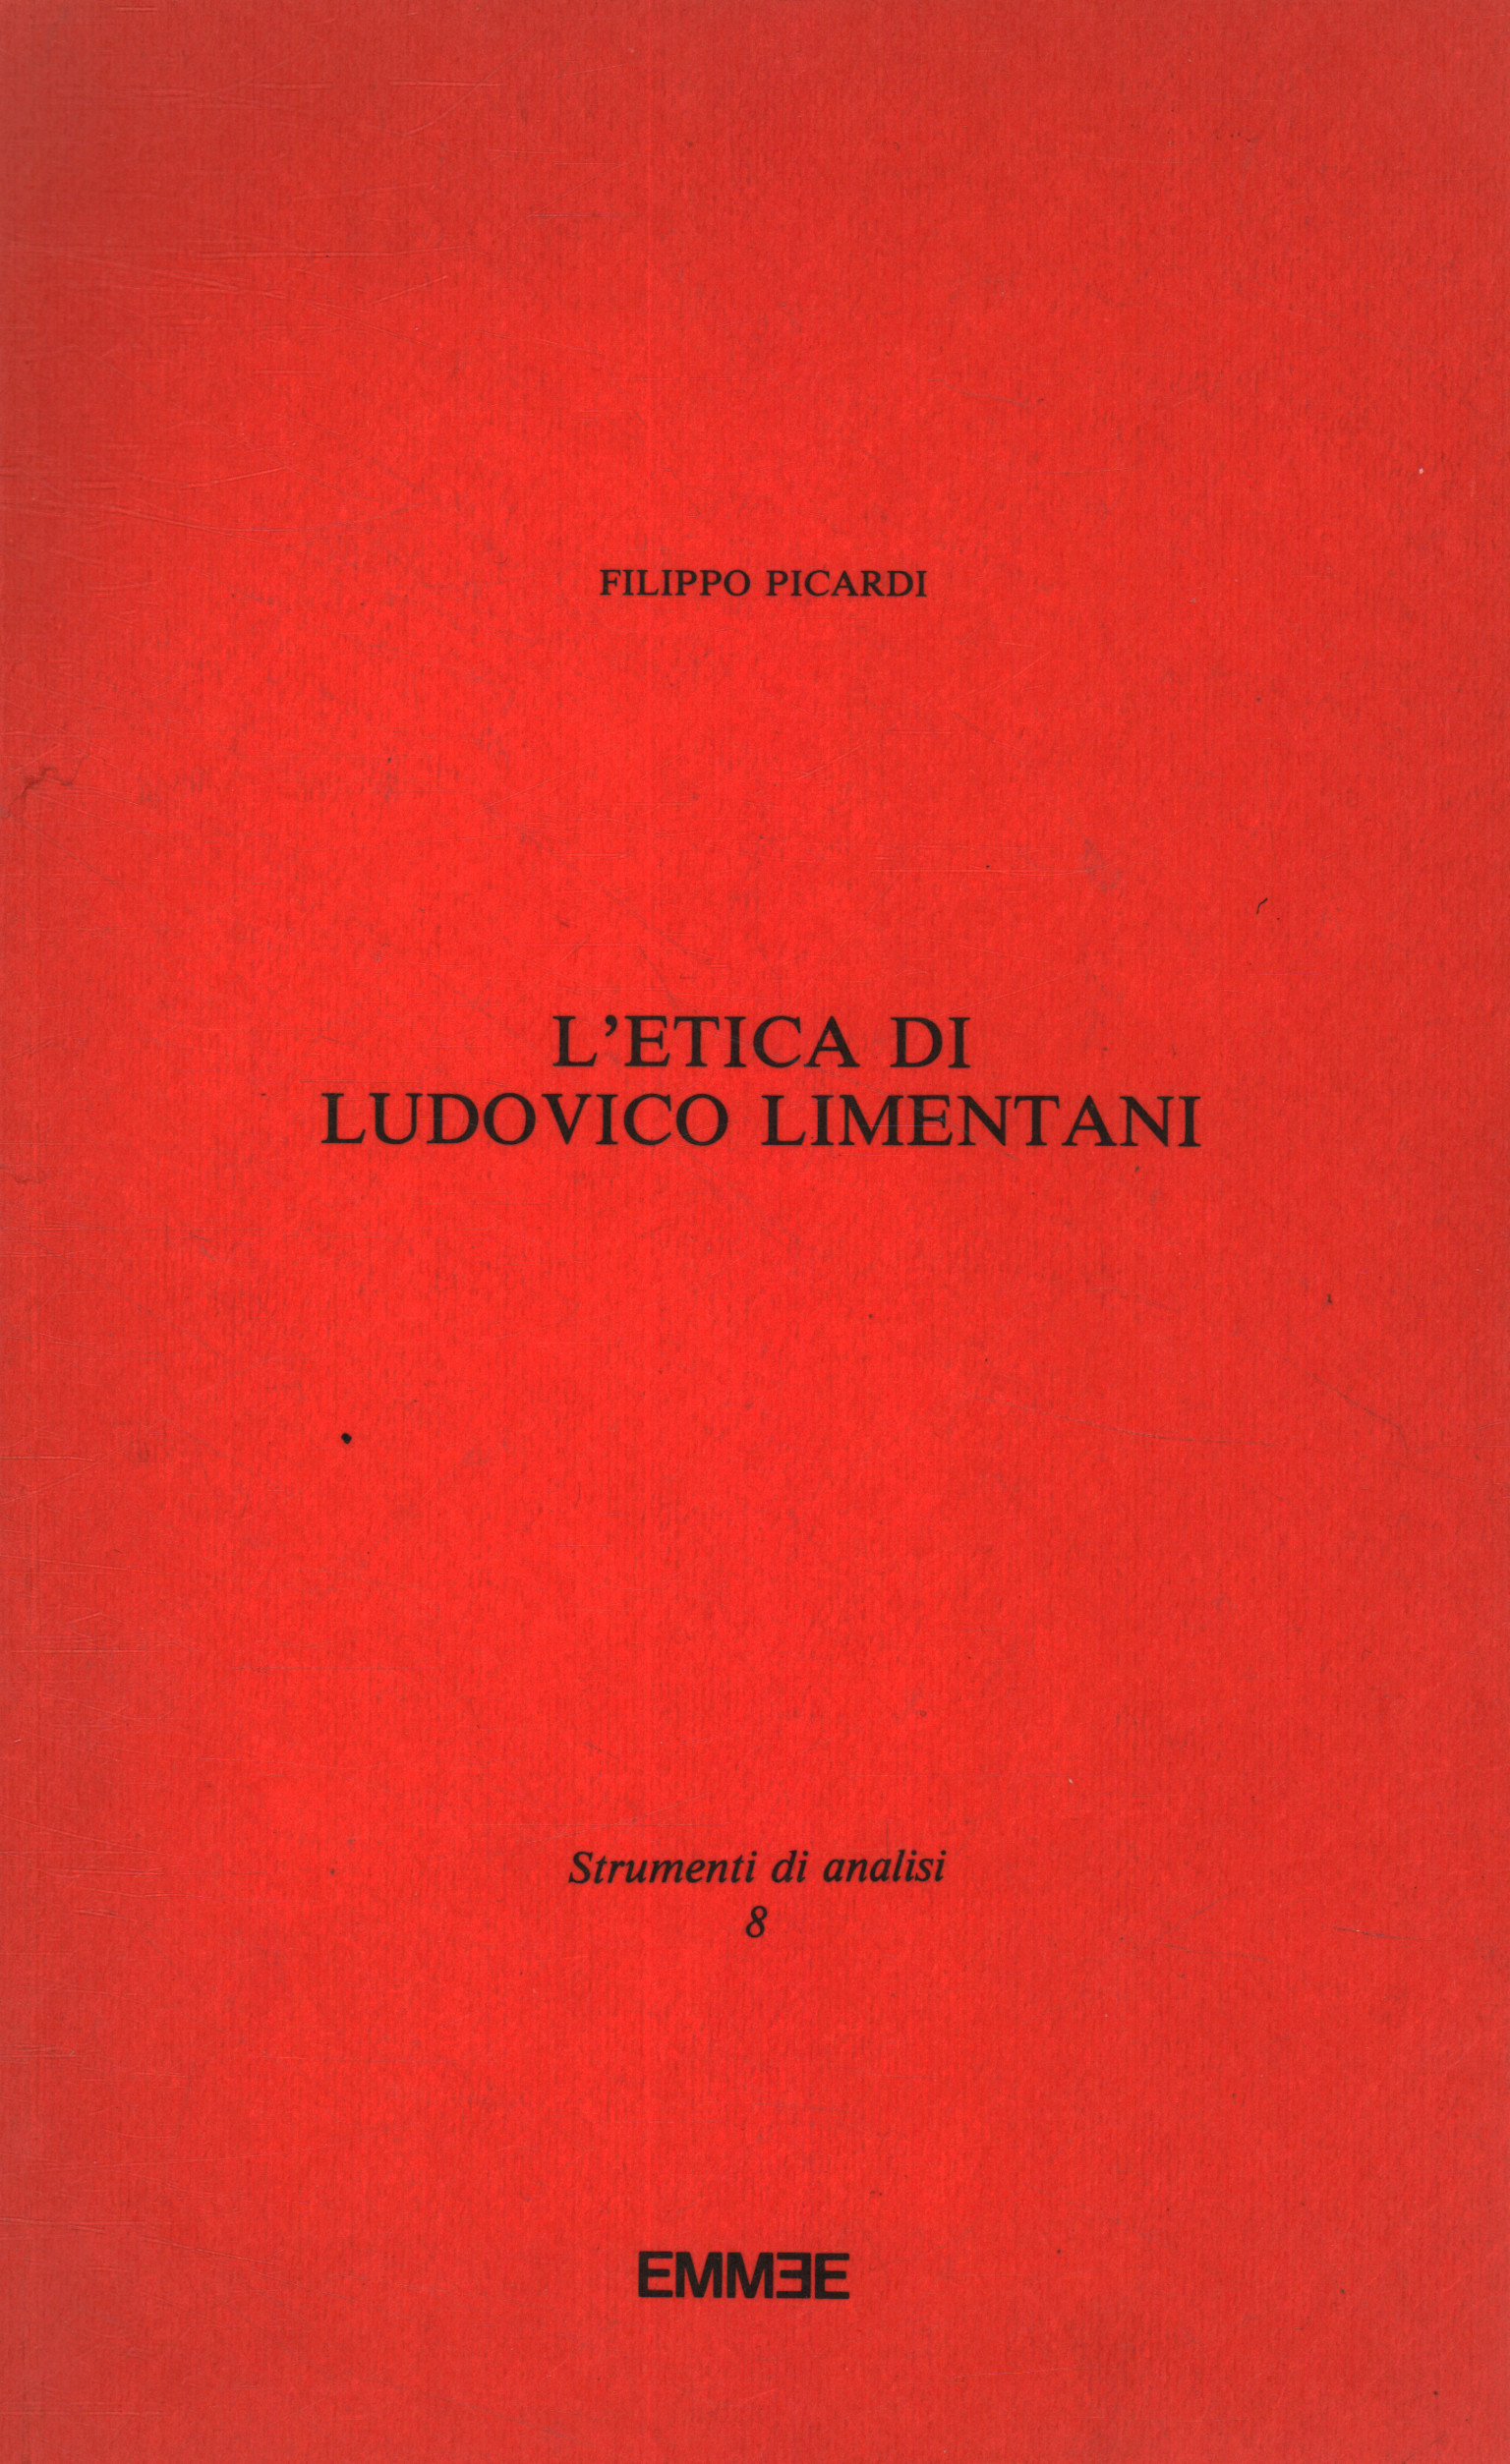 The ethics of Ludovico Limentani